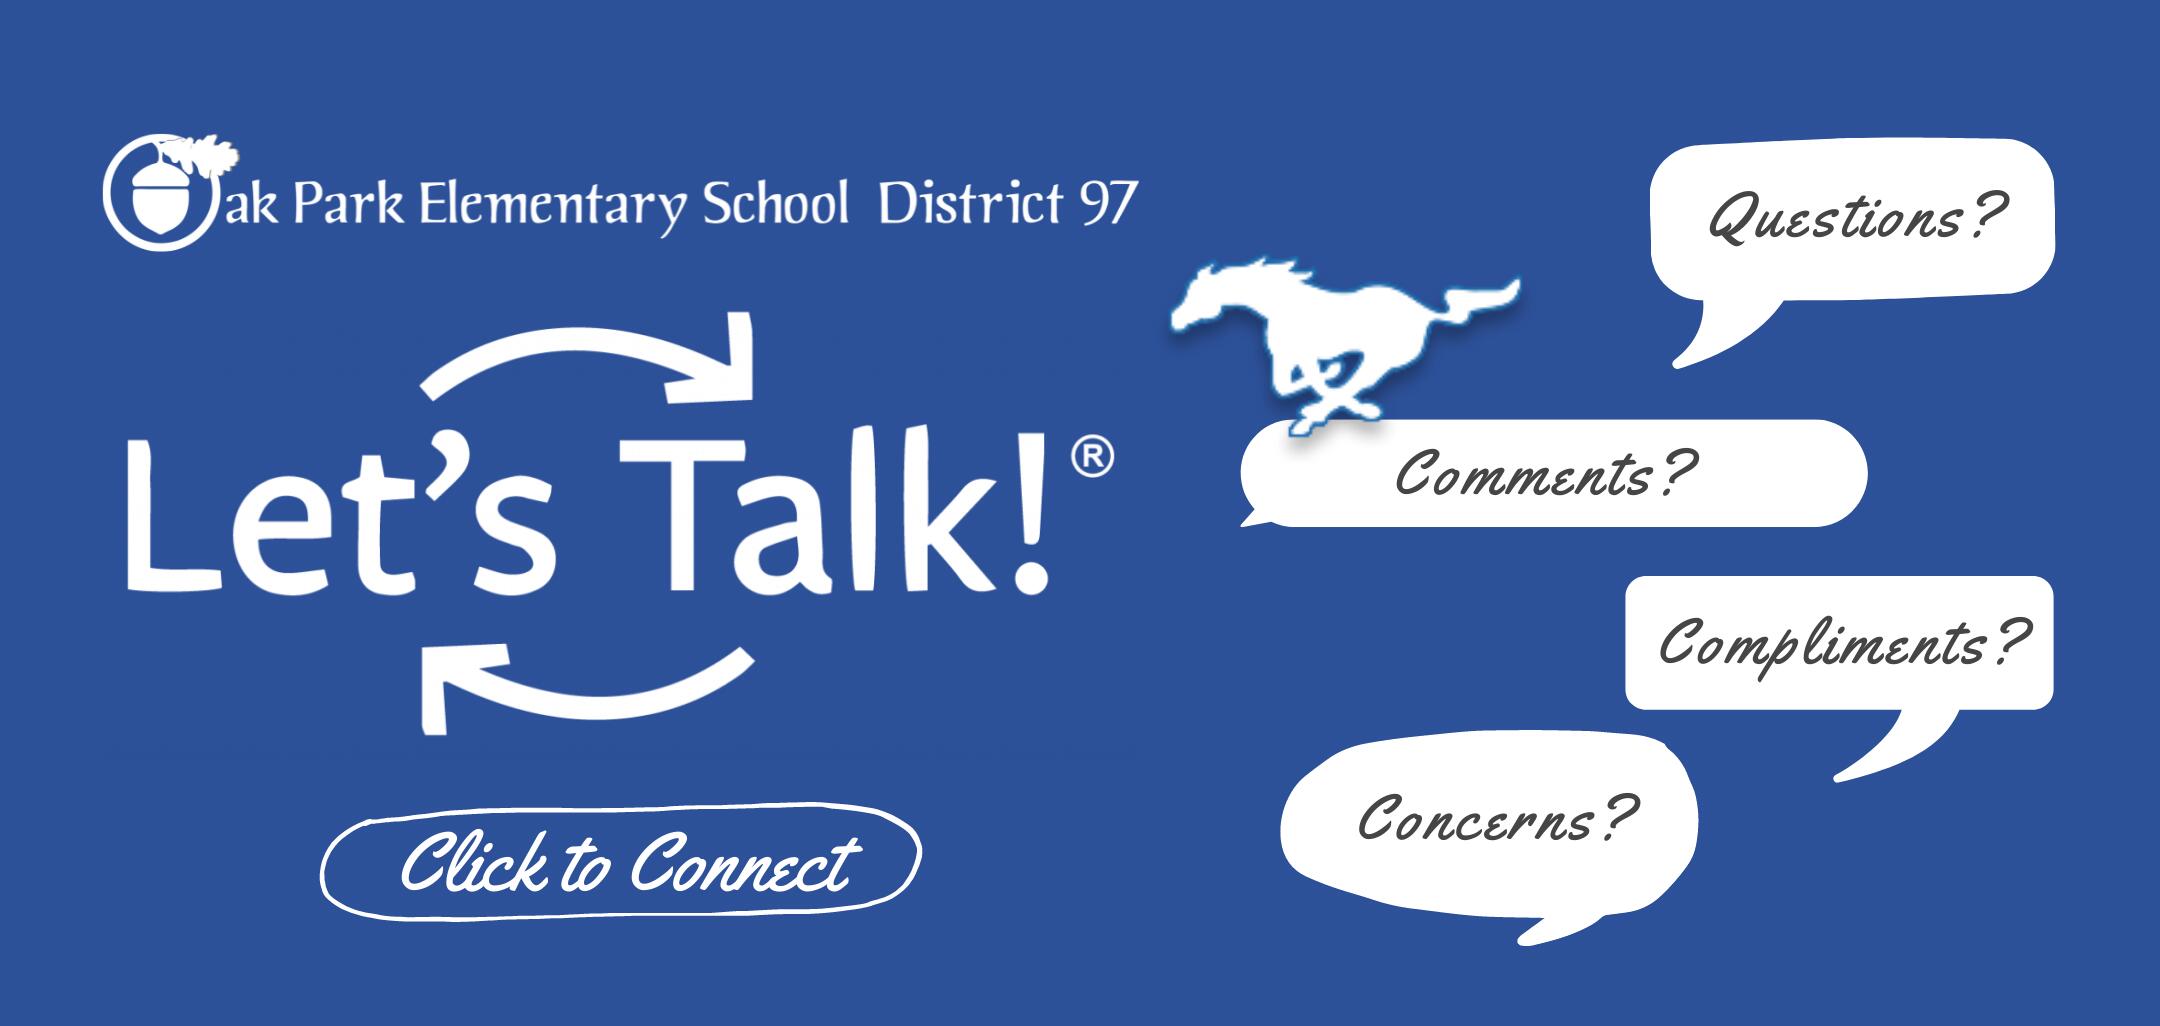 Share questions, concerns or compliments via Let's Talk!